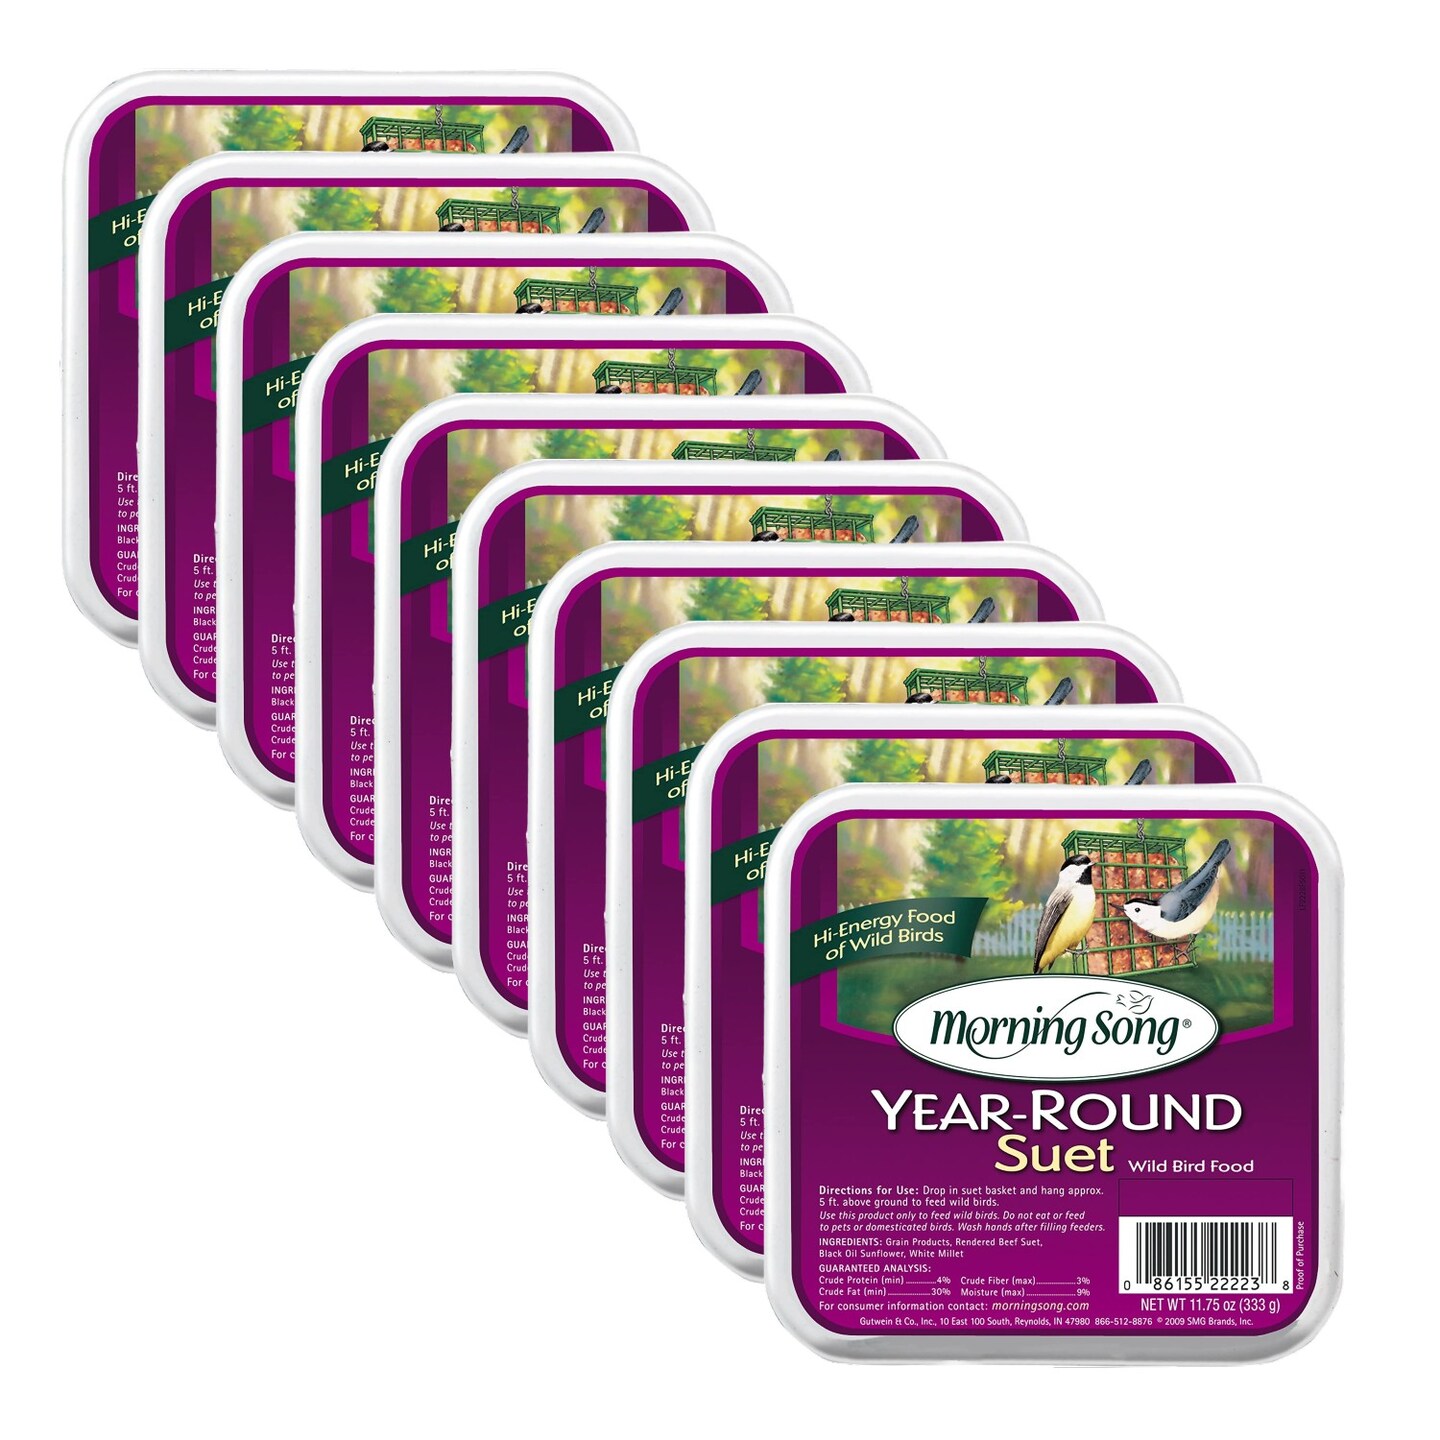 Morning Song Year Round Suet - 10 pack of 11.75 ounces each for Every Season of the Year